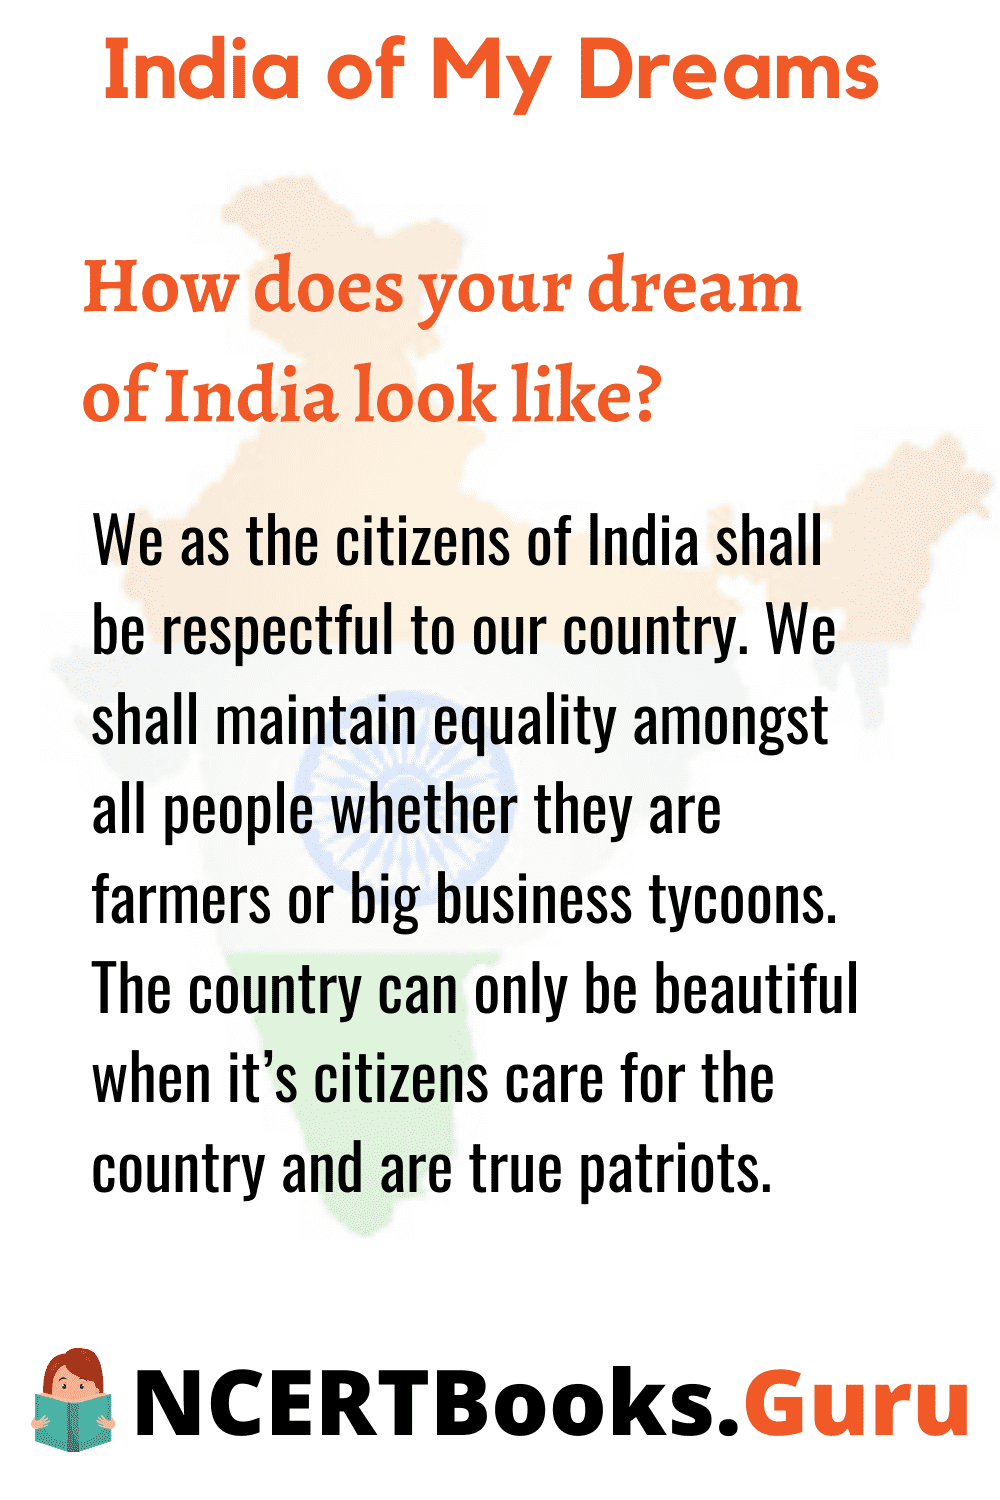 How does your dream of India look like